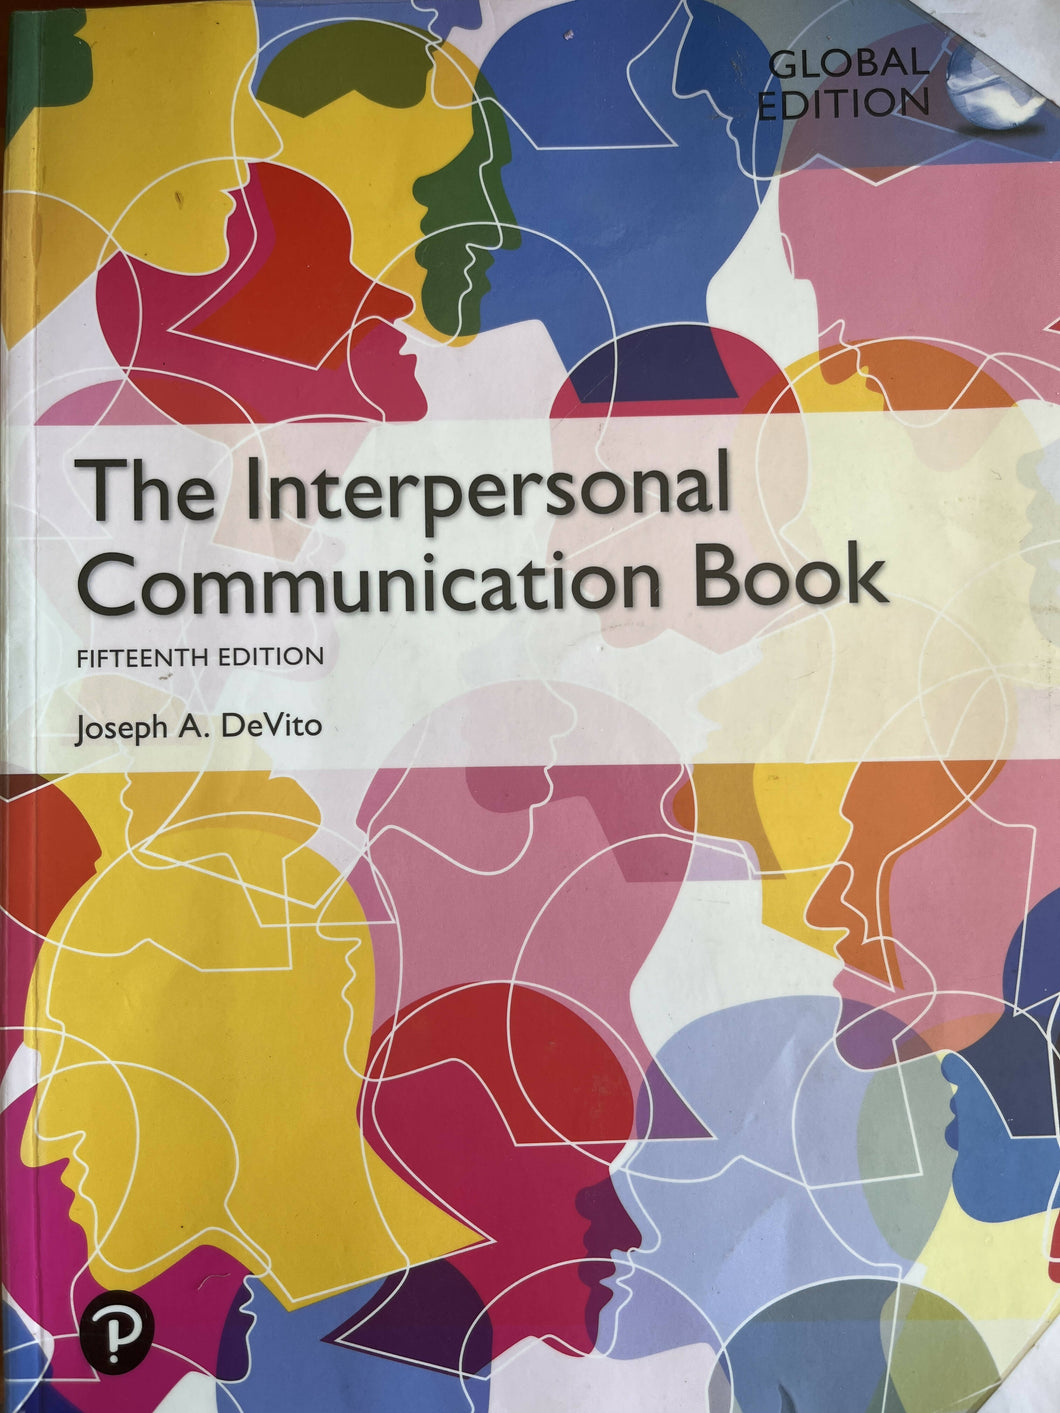 The interpersonal Communication Book